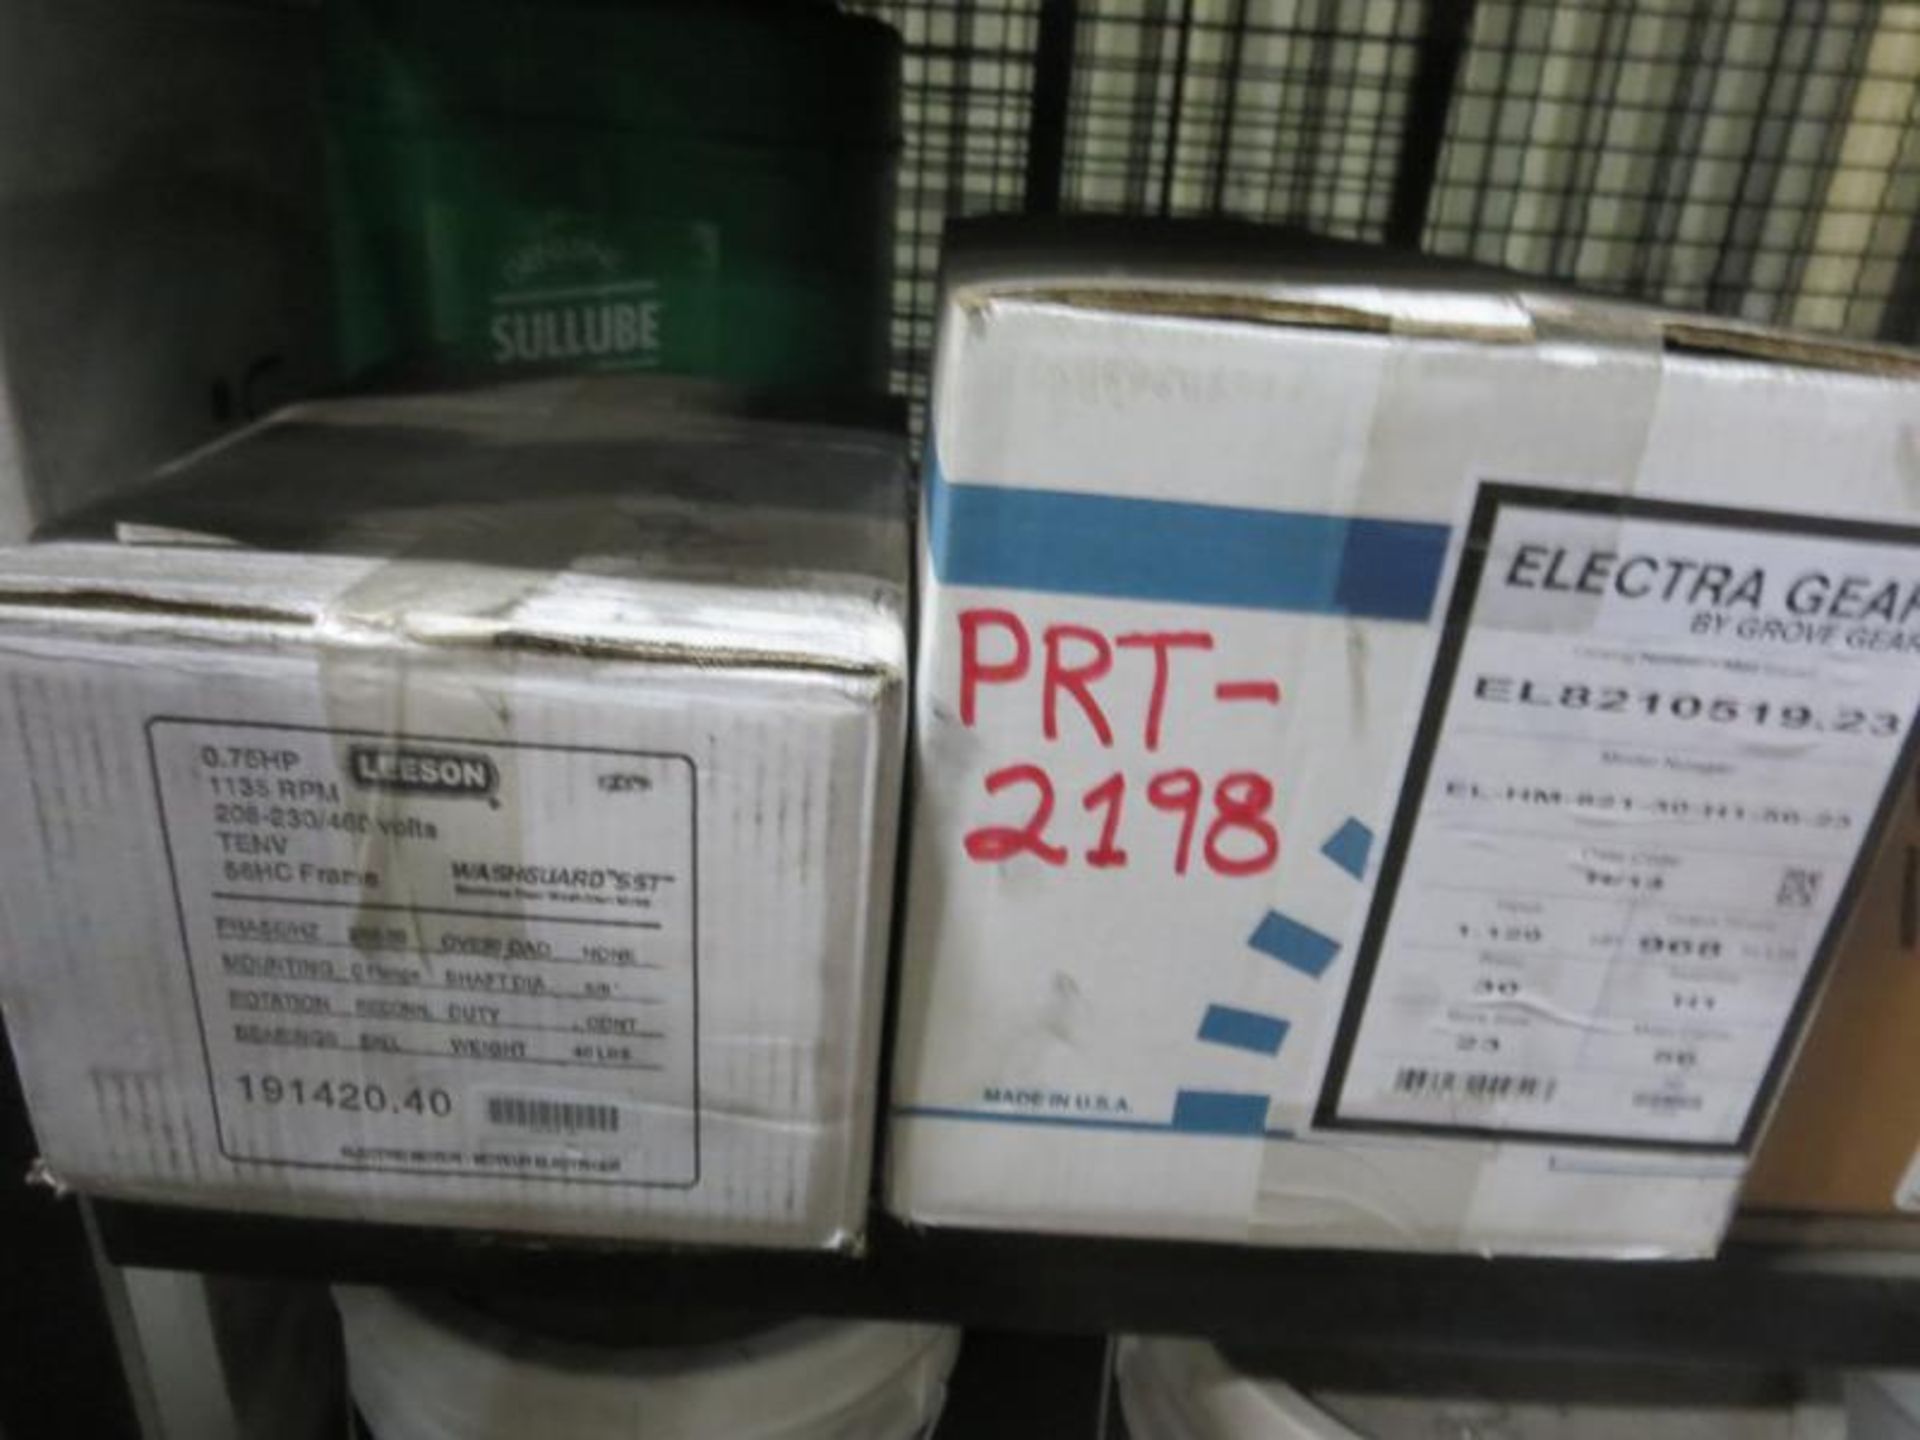 Lot (22) Motors, 1/5hp, .33hp, 2hp, 1/4hp, 1 1/2hp, 1/3hp, 1/2hp. (1) .75hp Stainless Steel - Image 8 of 8